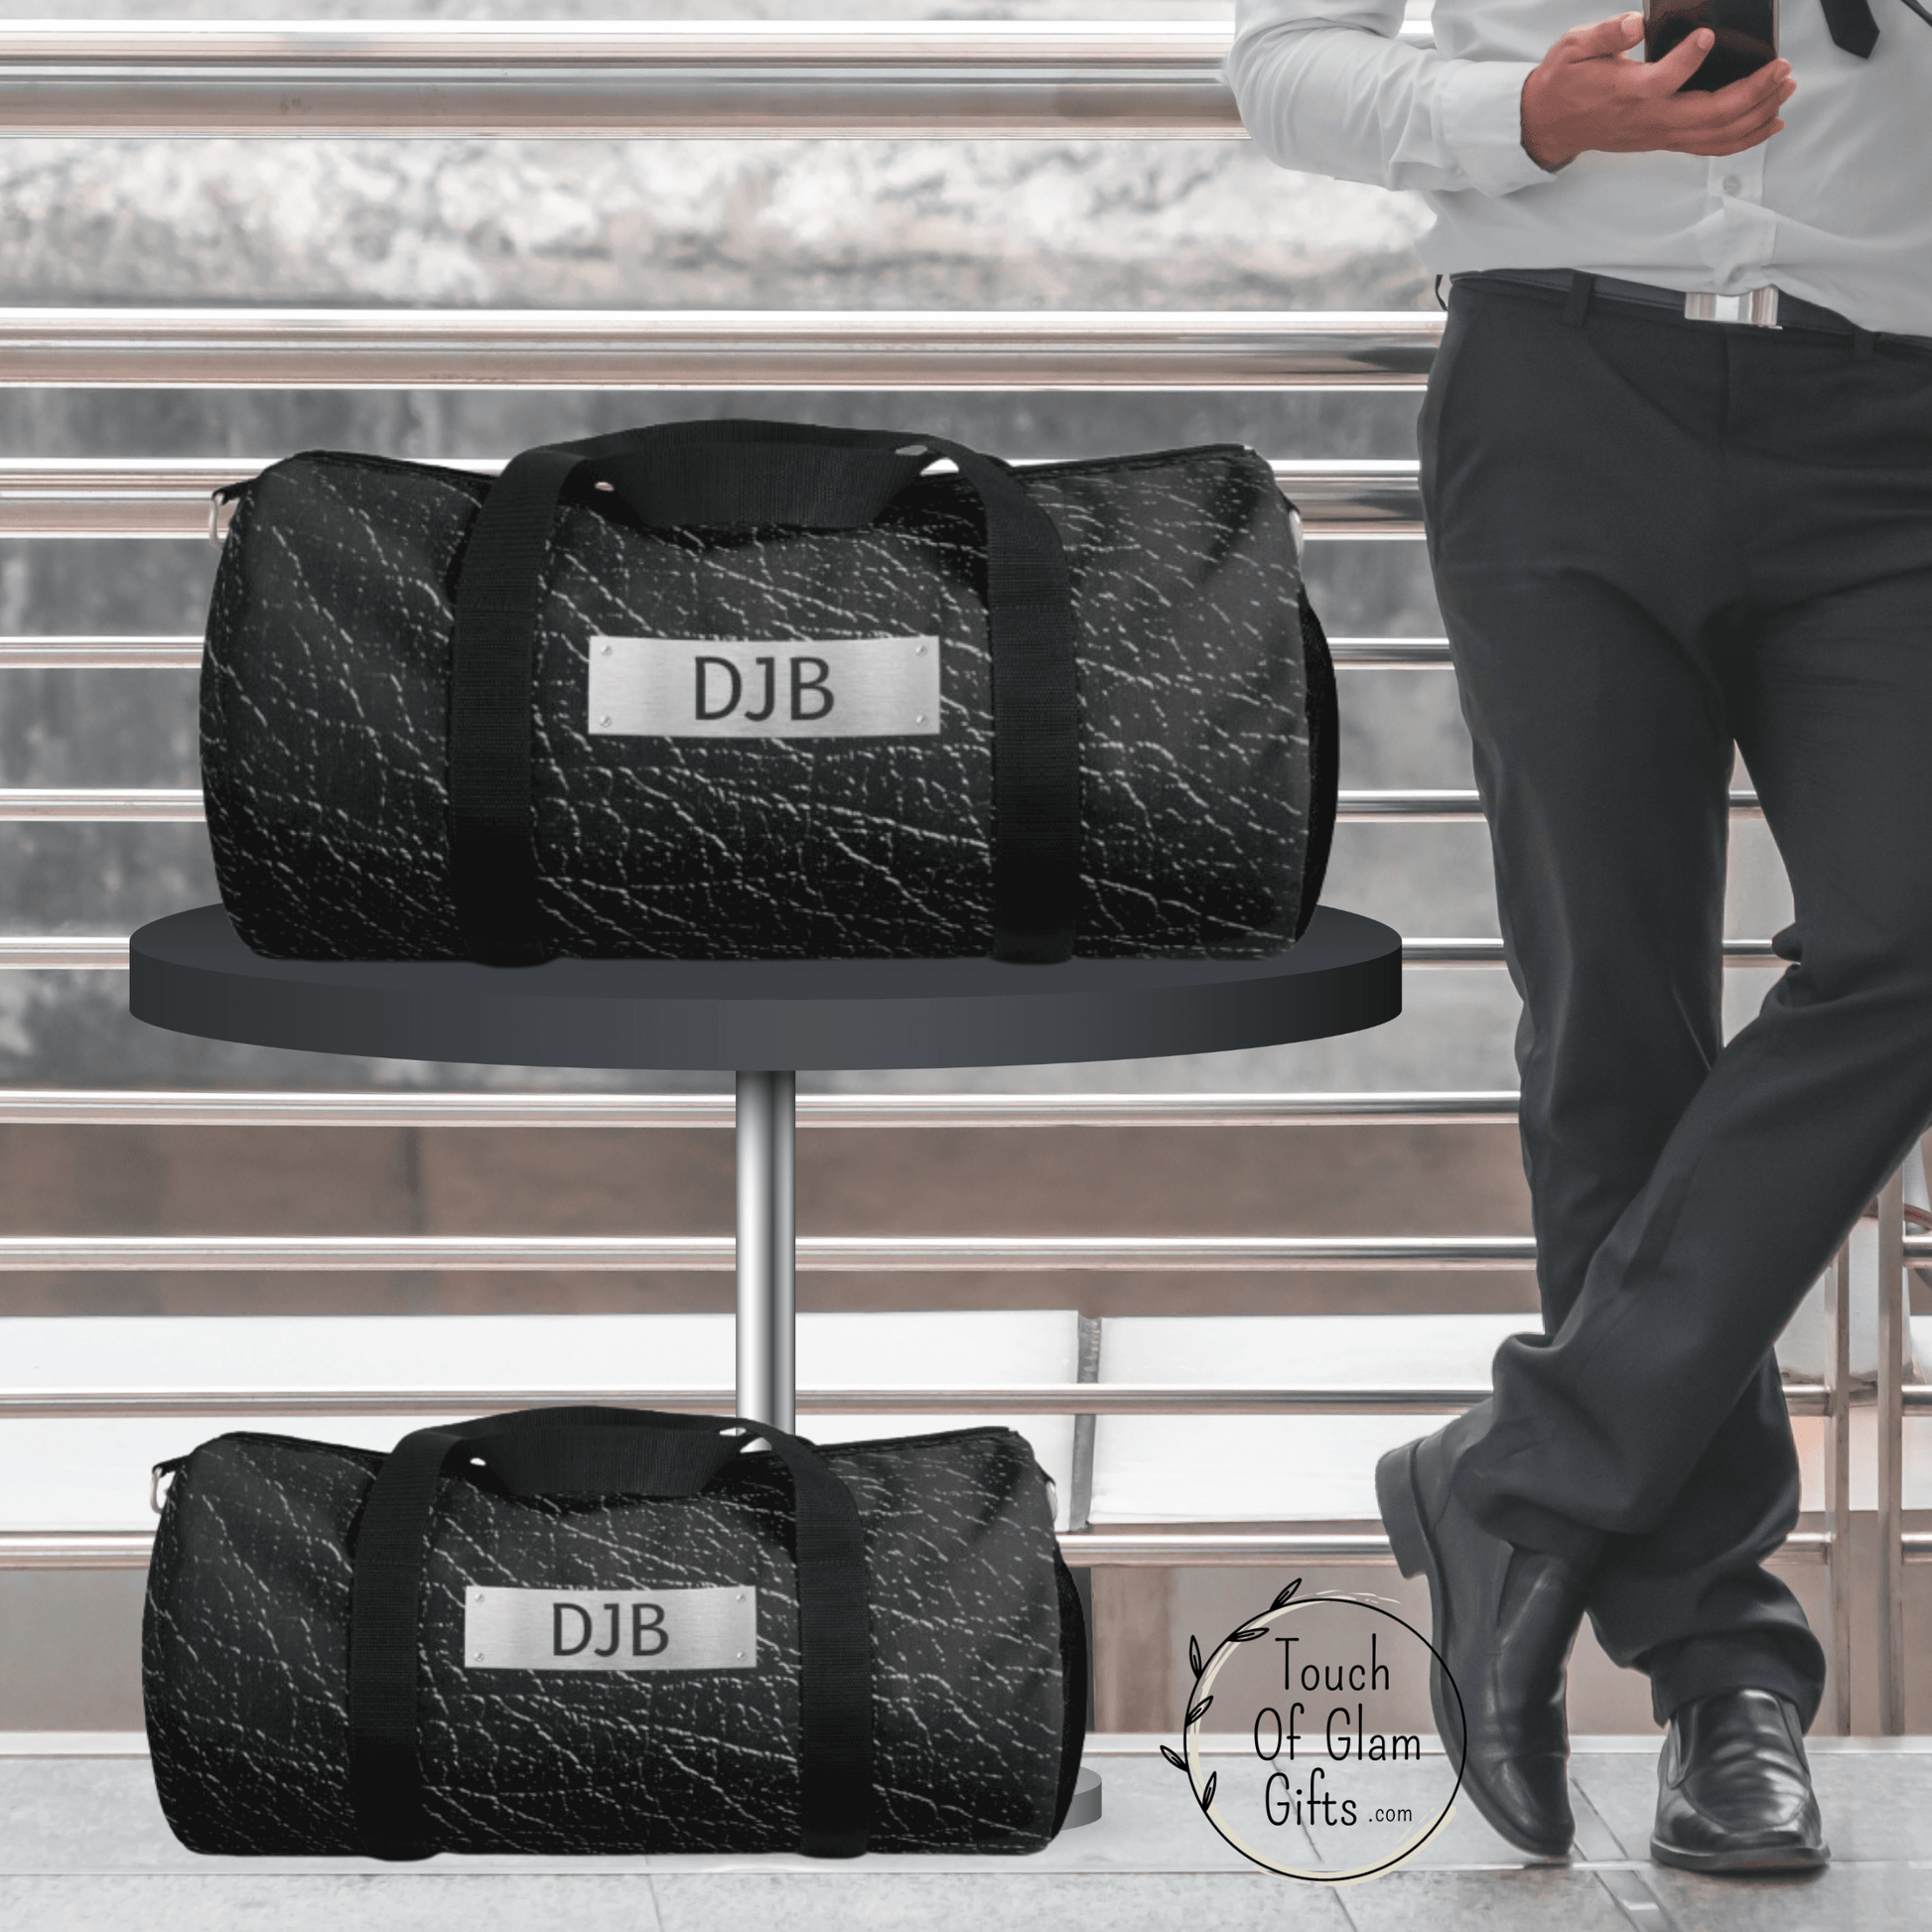 The large charcoal grey duffel bag sits on a table next to a guy checking his phone and the small duffel bag for guys is on the floor. both are identical and have monogrammed personalization for the perfect gift for guys.